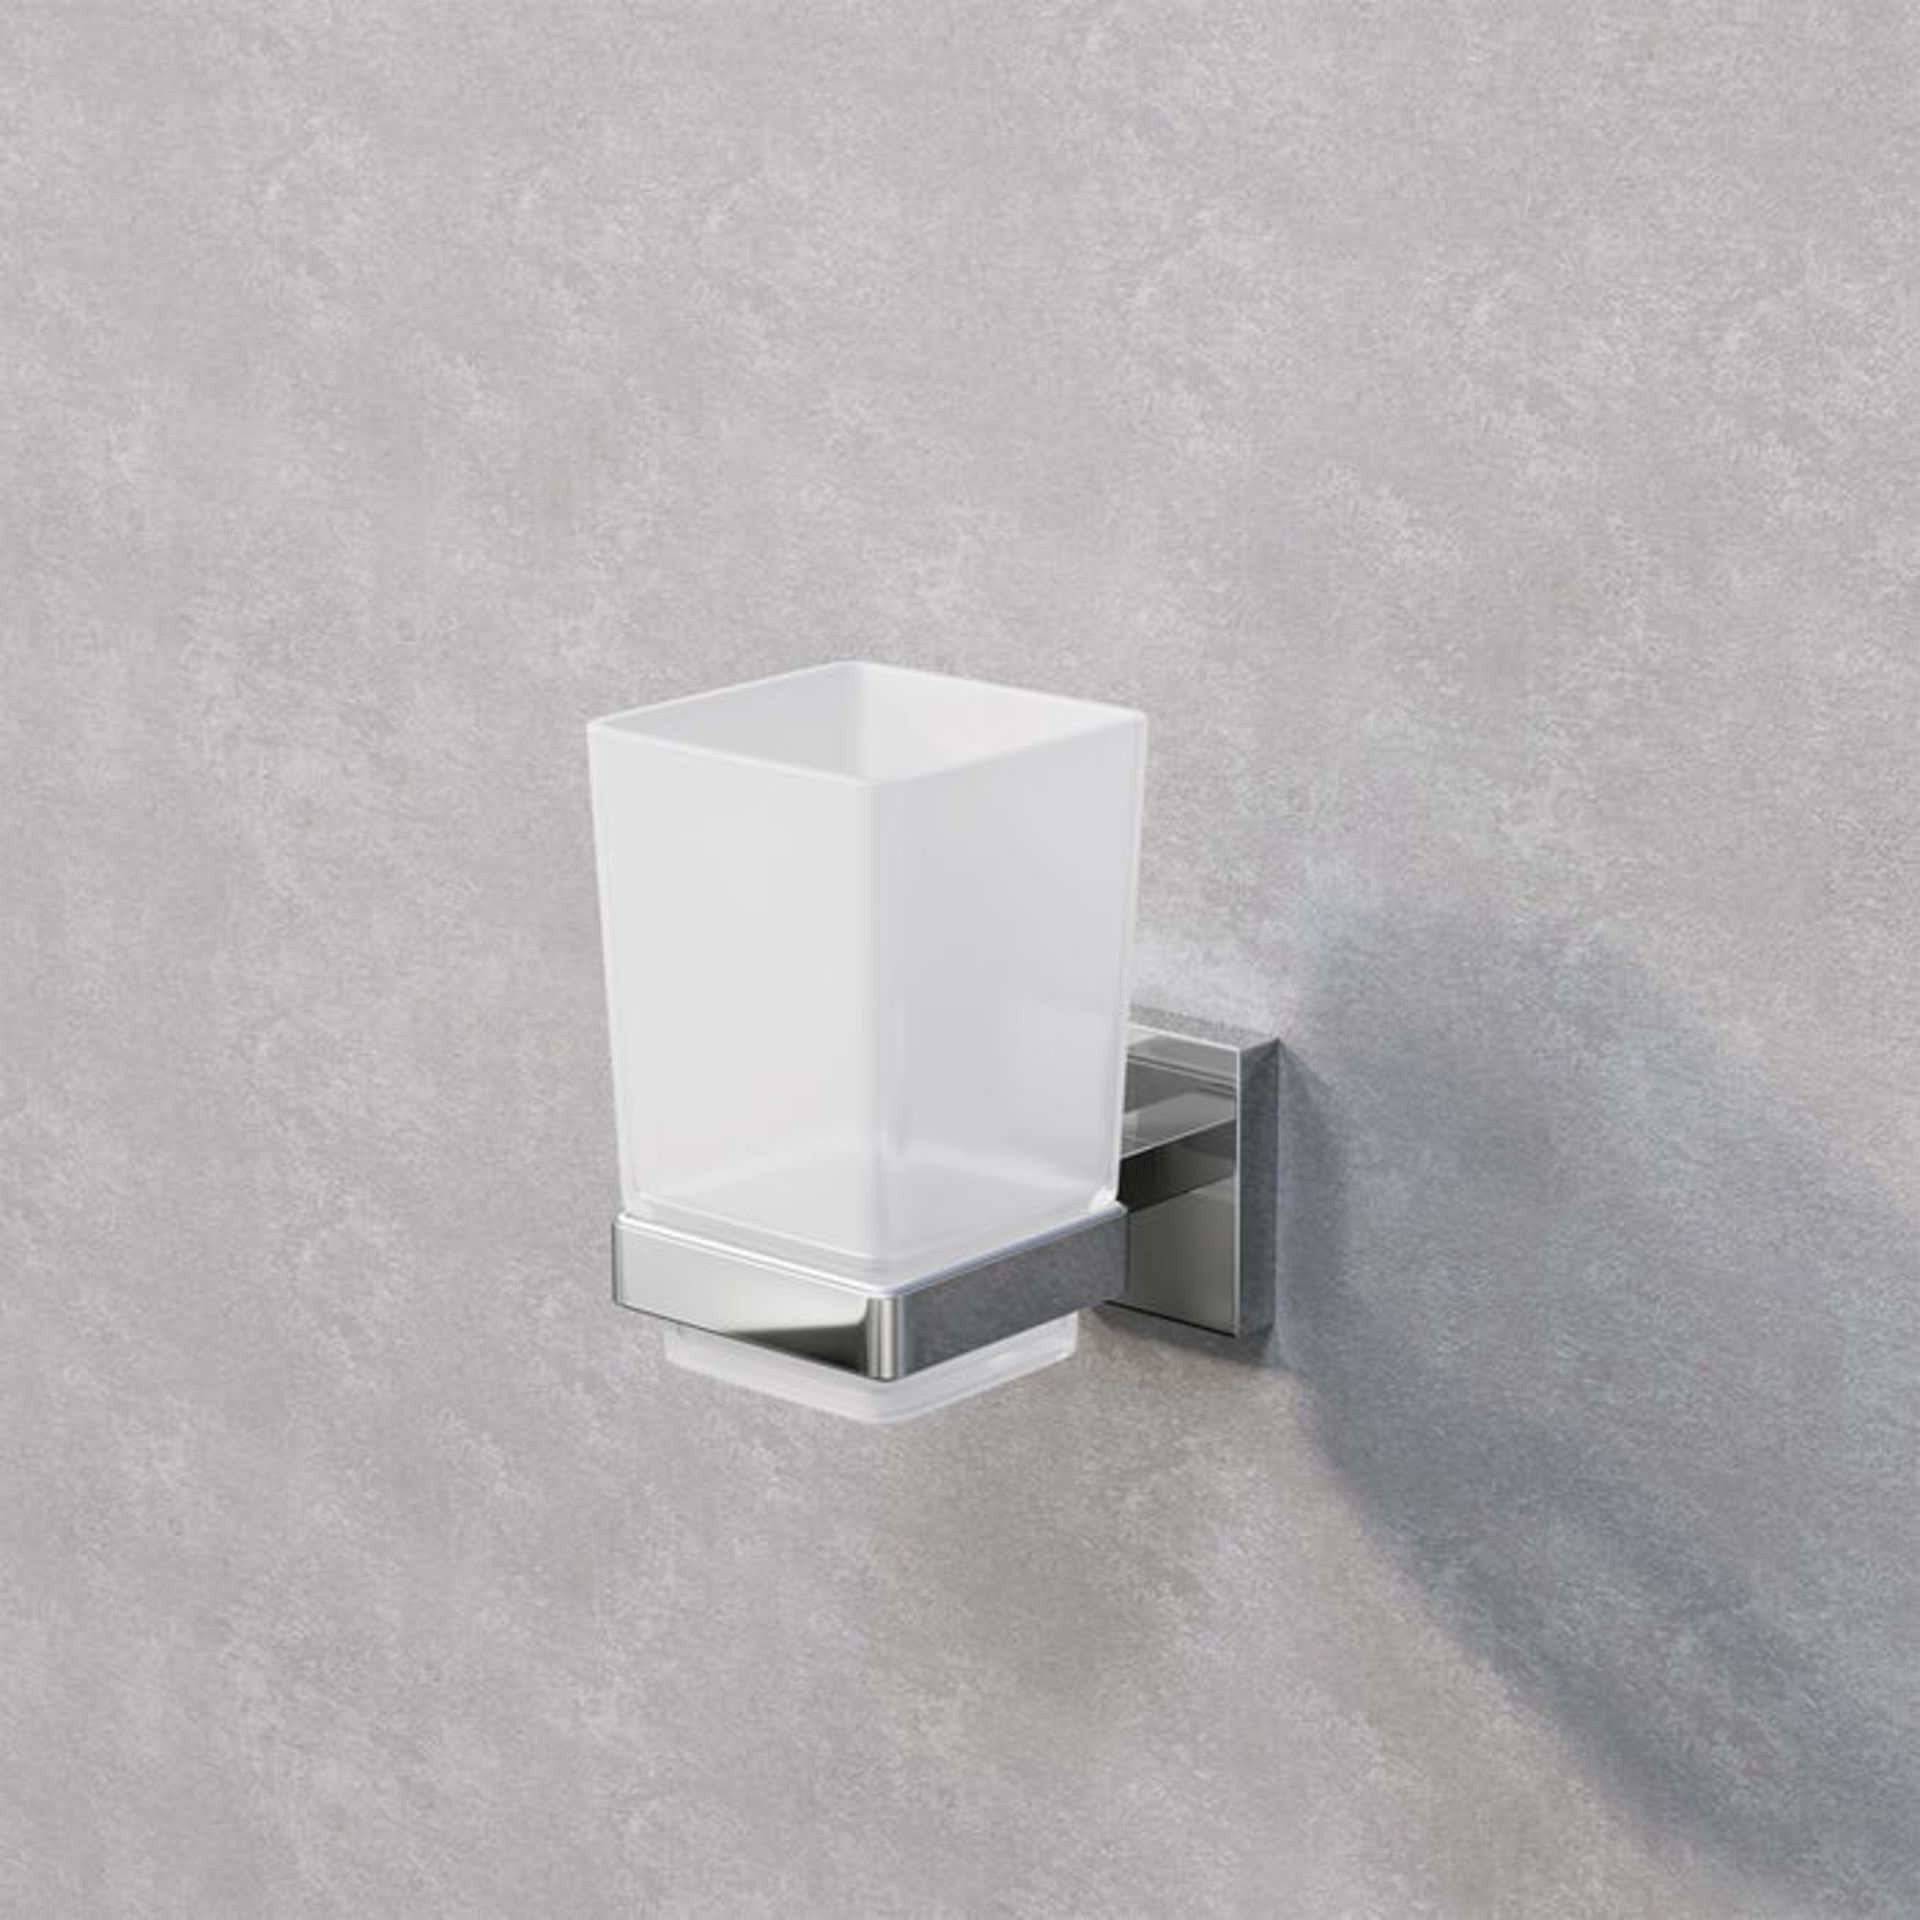 (E1013) Jesmond Tumbler Holder Finishes your bathroom with a little extra functionality and st... - Image 2 of 3